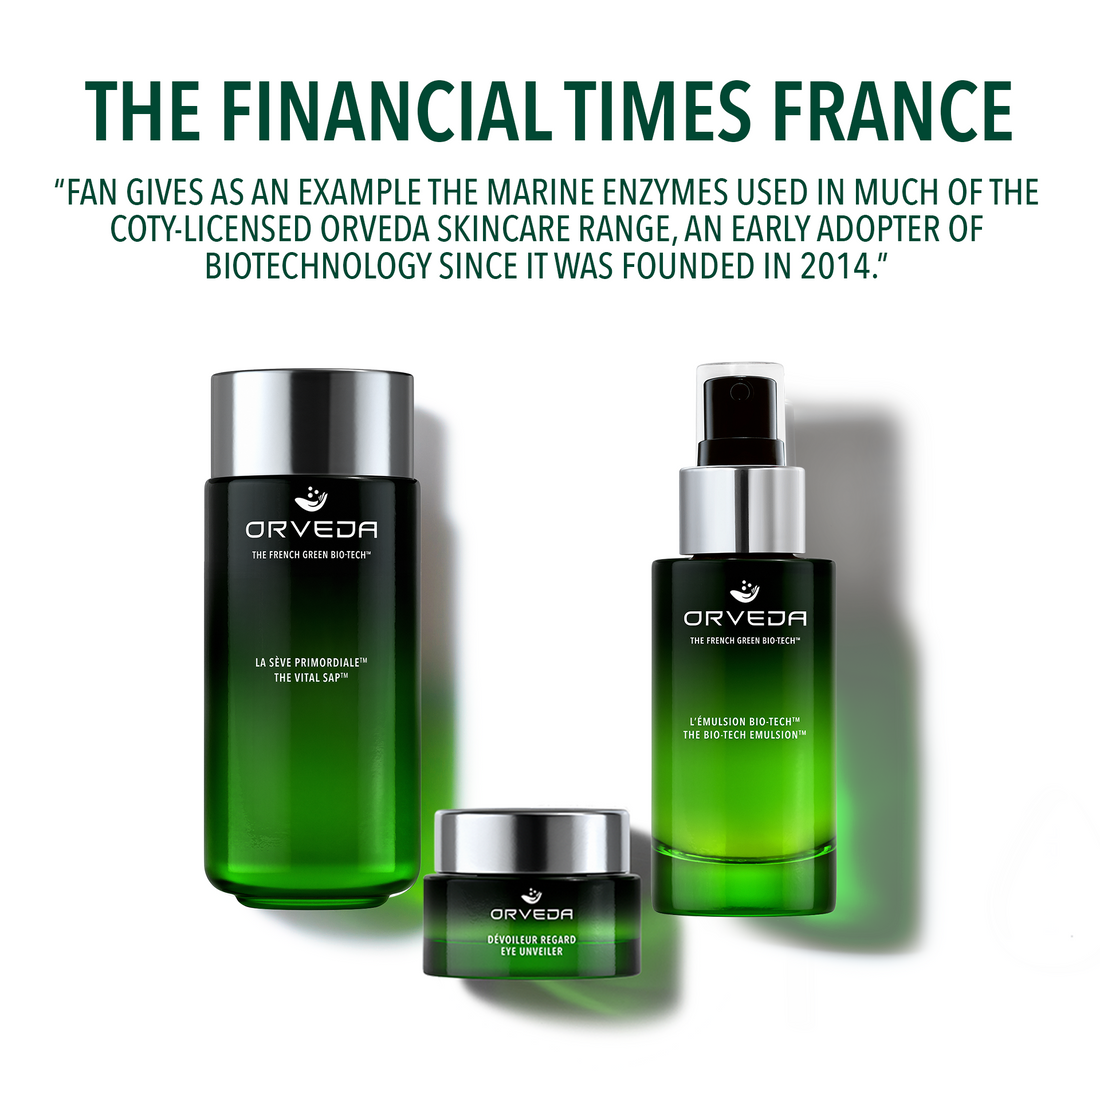 THE FINANCIAL TIMES FRANCE